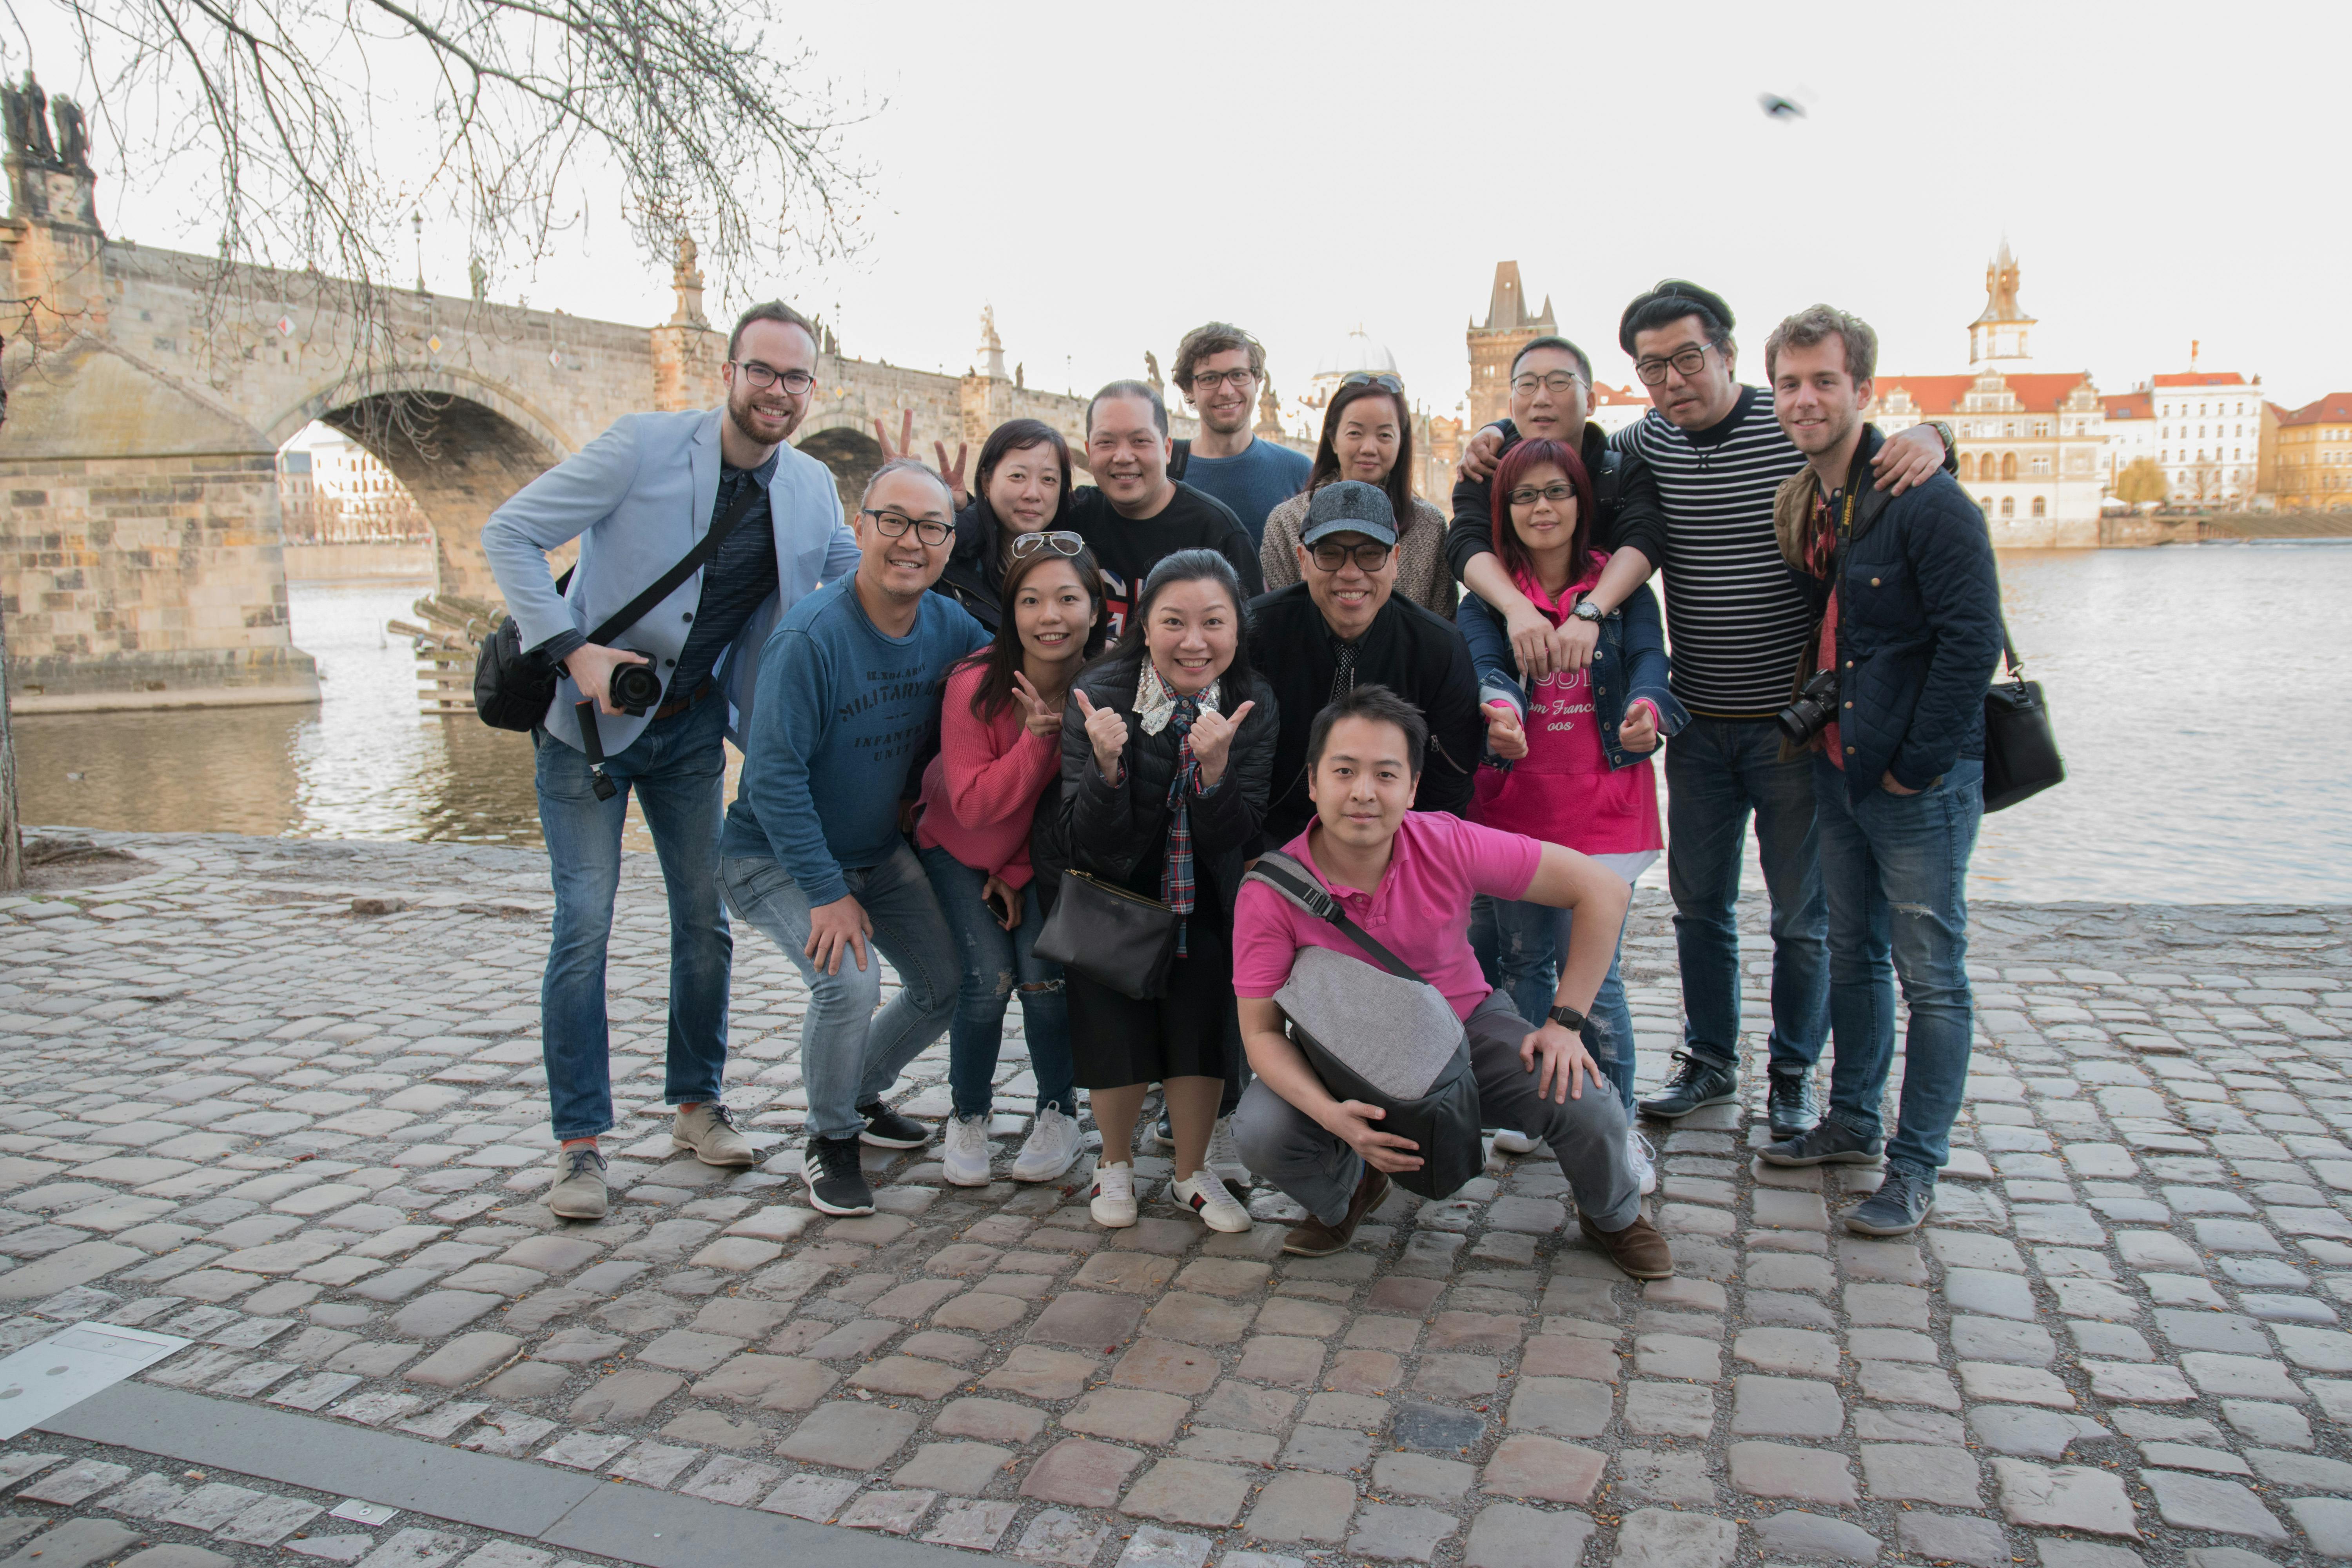 Behind the scenes photo of a team from a video shoot event with our clients from Hong Kong next to the Charles Bridge.